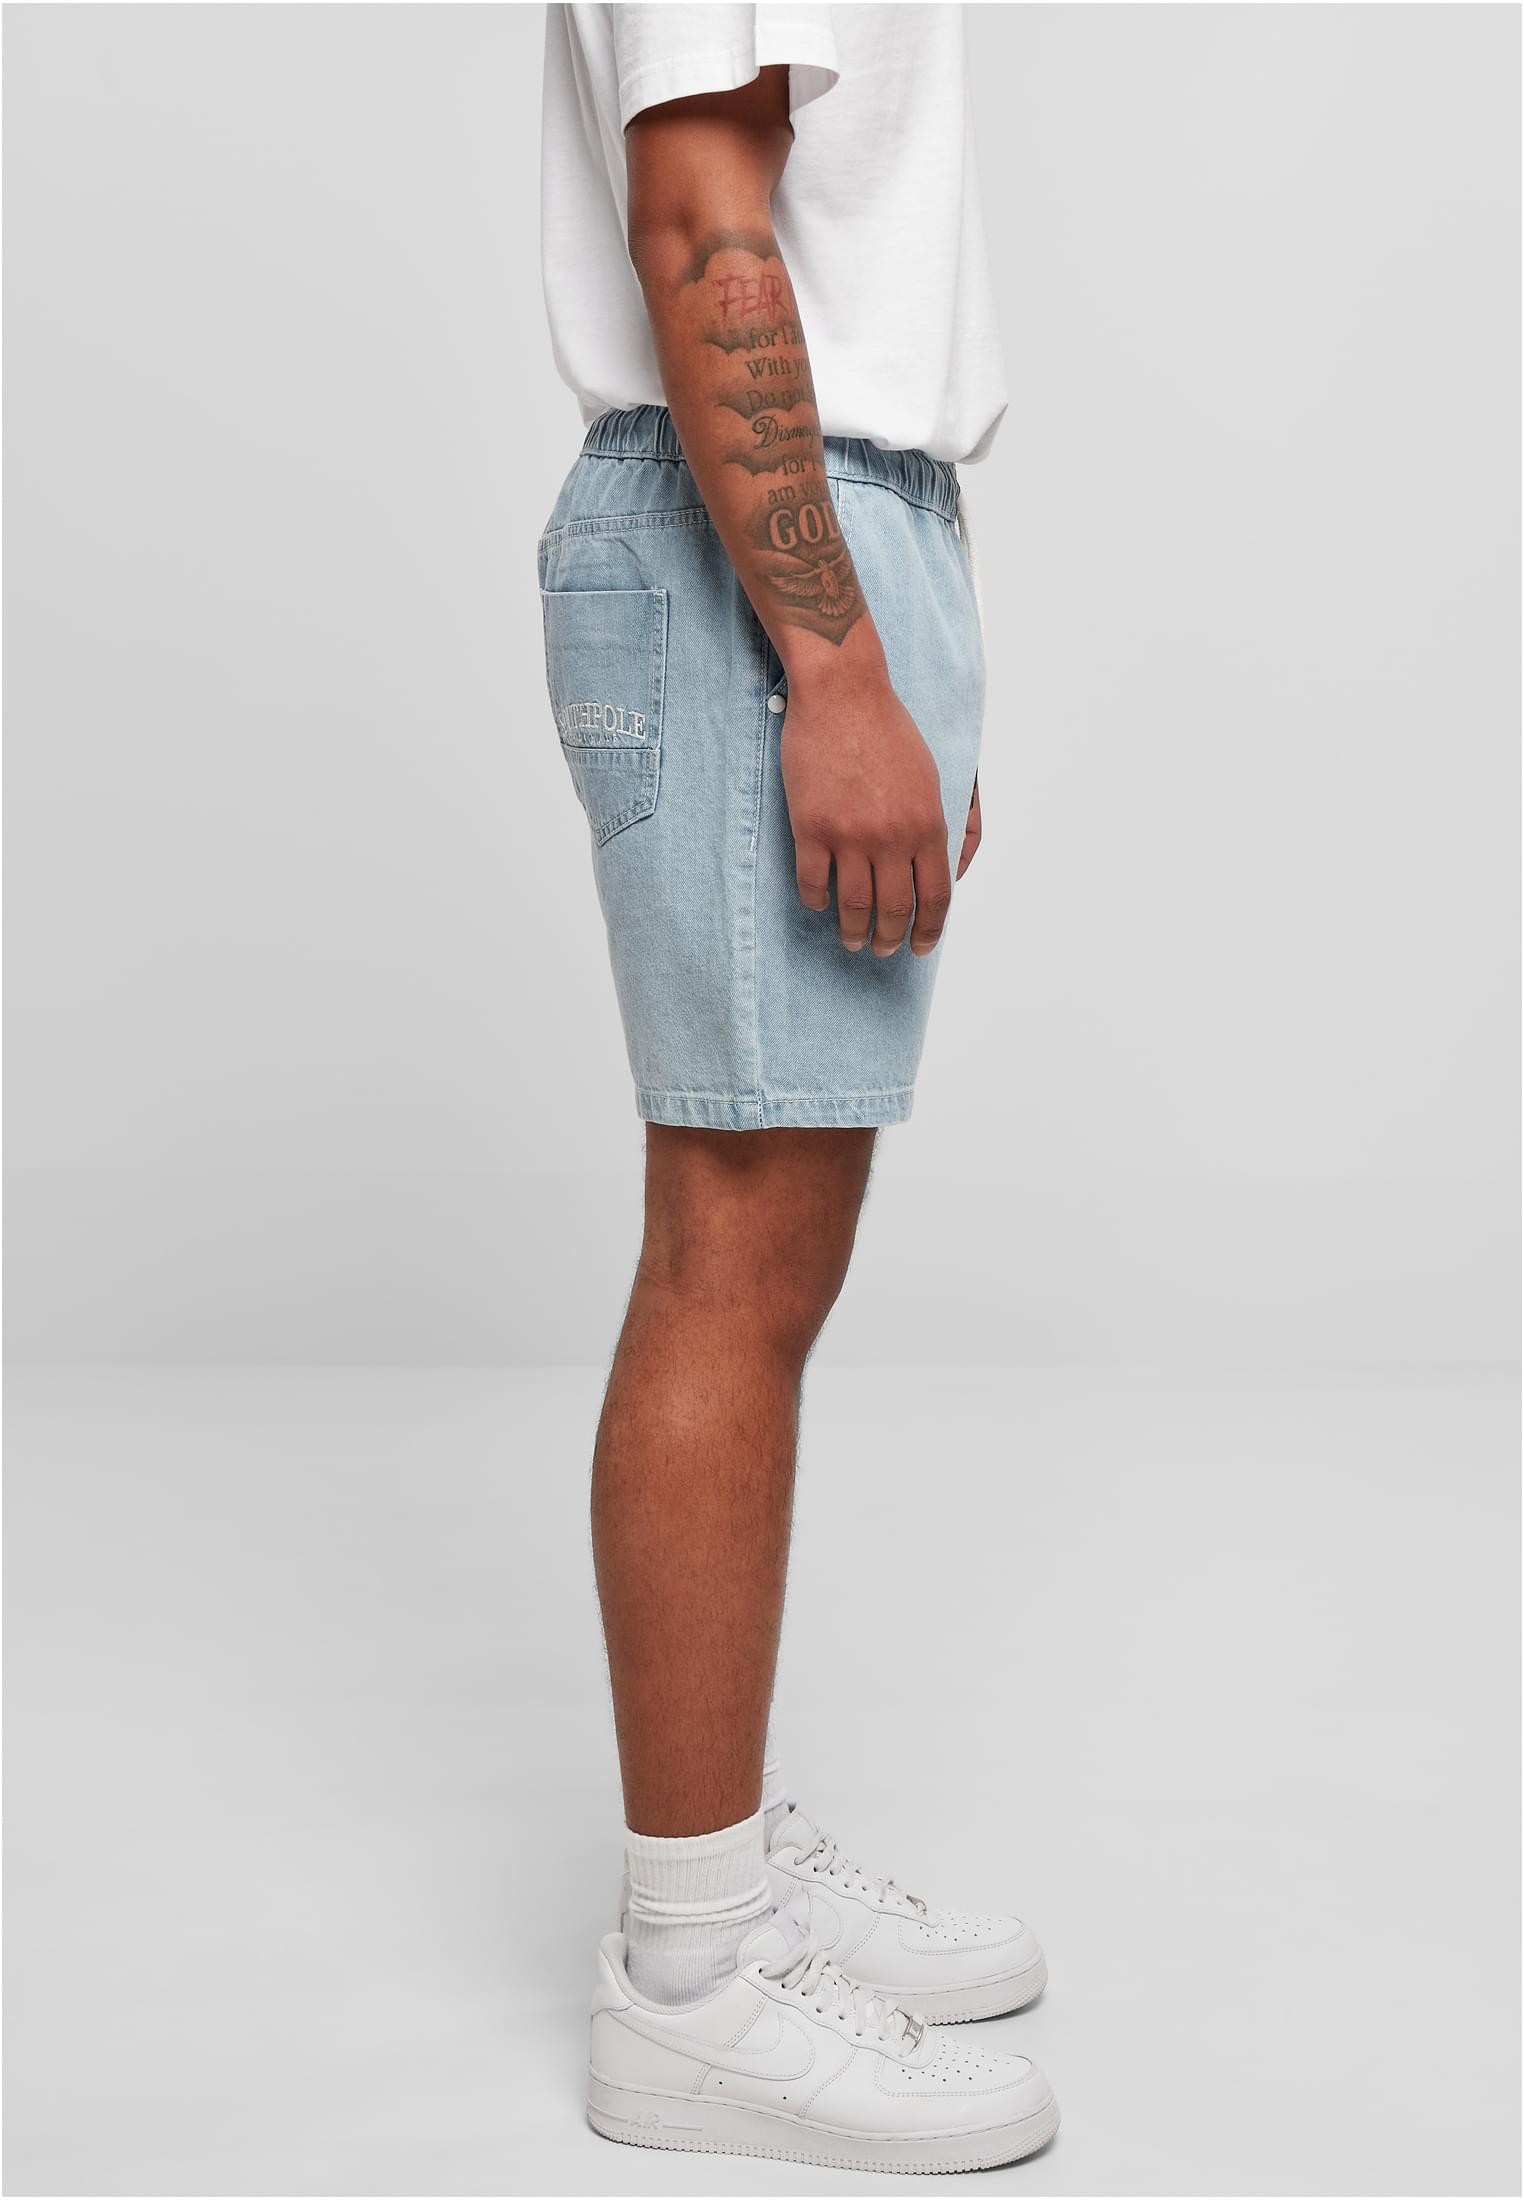 Saisonware Southpole Denim Shorts in Farbe retro ltblue destroyed washed